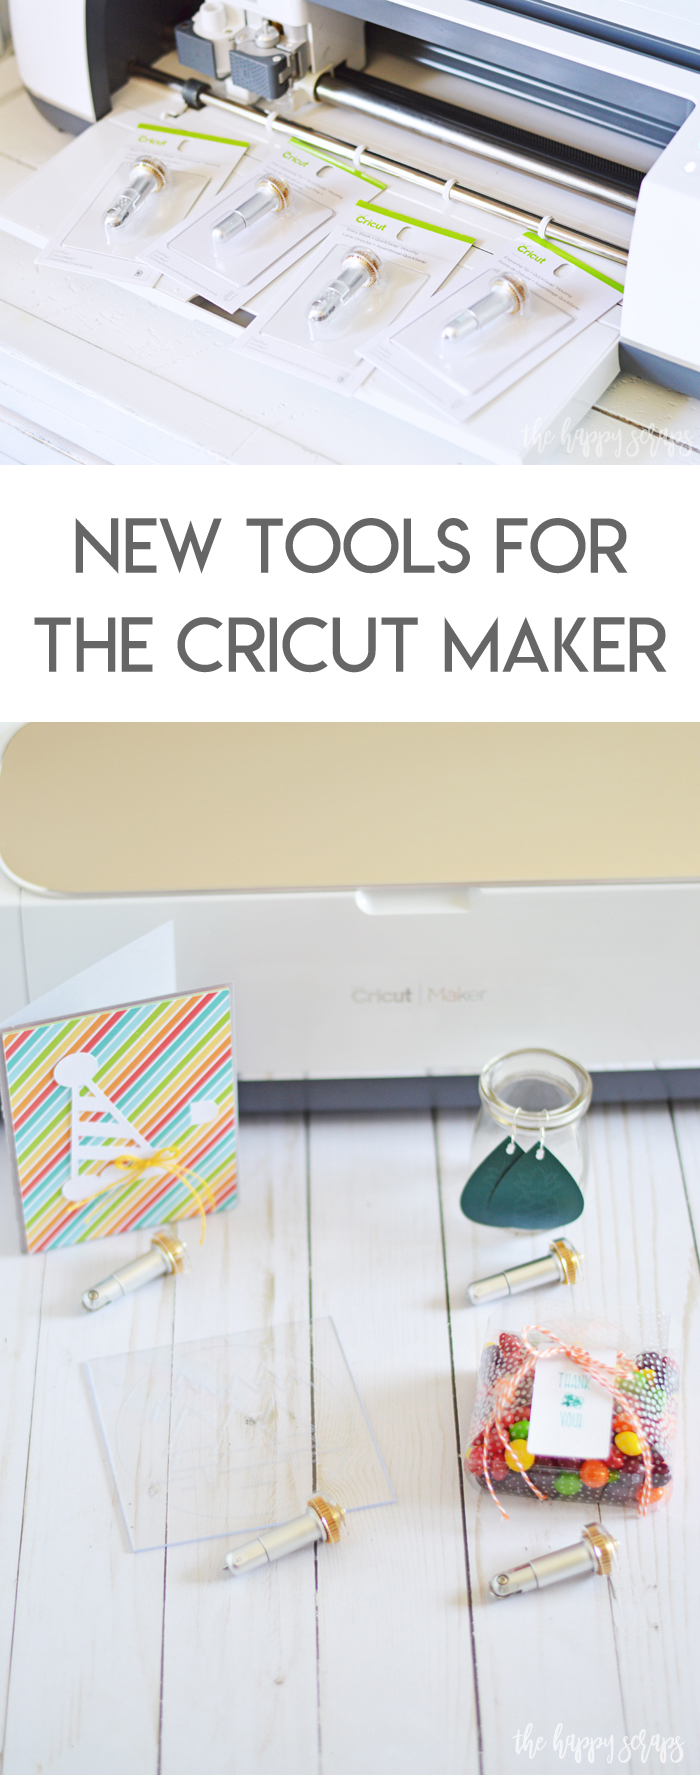 These four New Tools for the Cricut Maker will be the perfect addition to your crafting space! They are so fun and versitle to use!